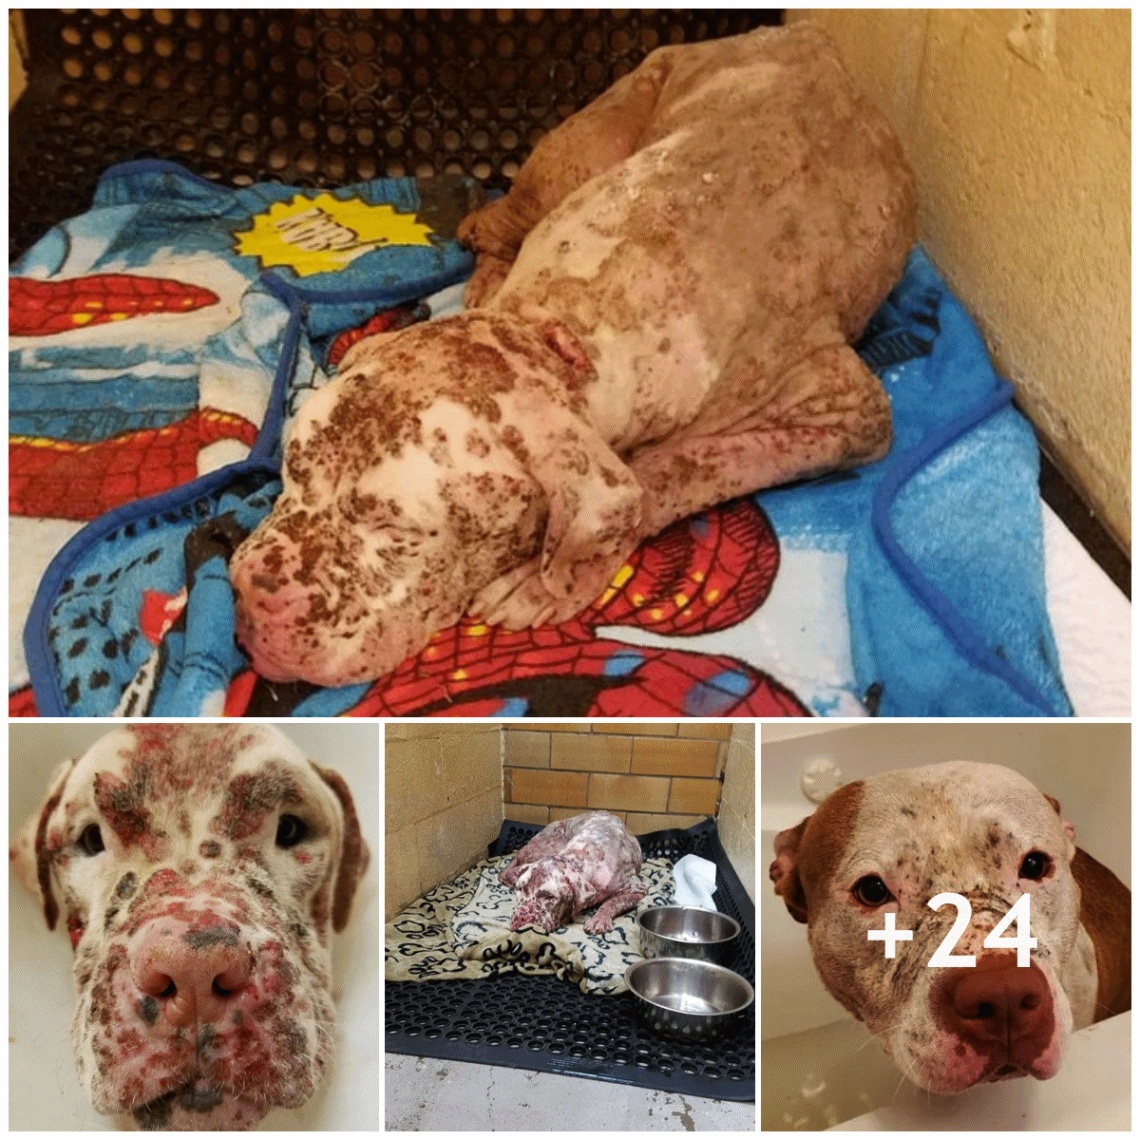 So terrible ! A dog was brutally attacked by an entire dog to the point of almost dying, but after months of intensive treatment, it miraculously made a full recovery.